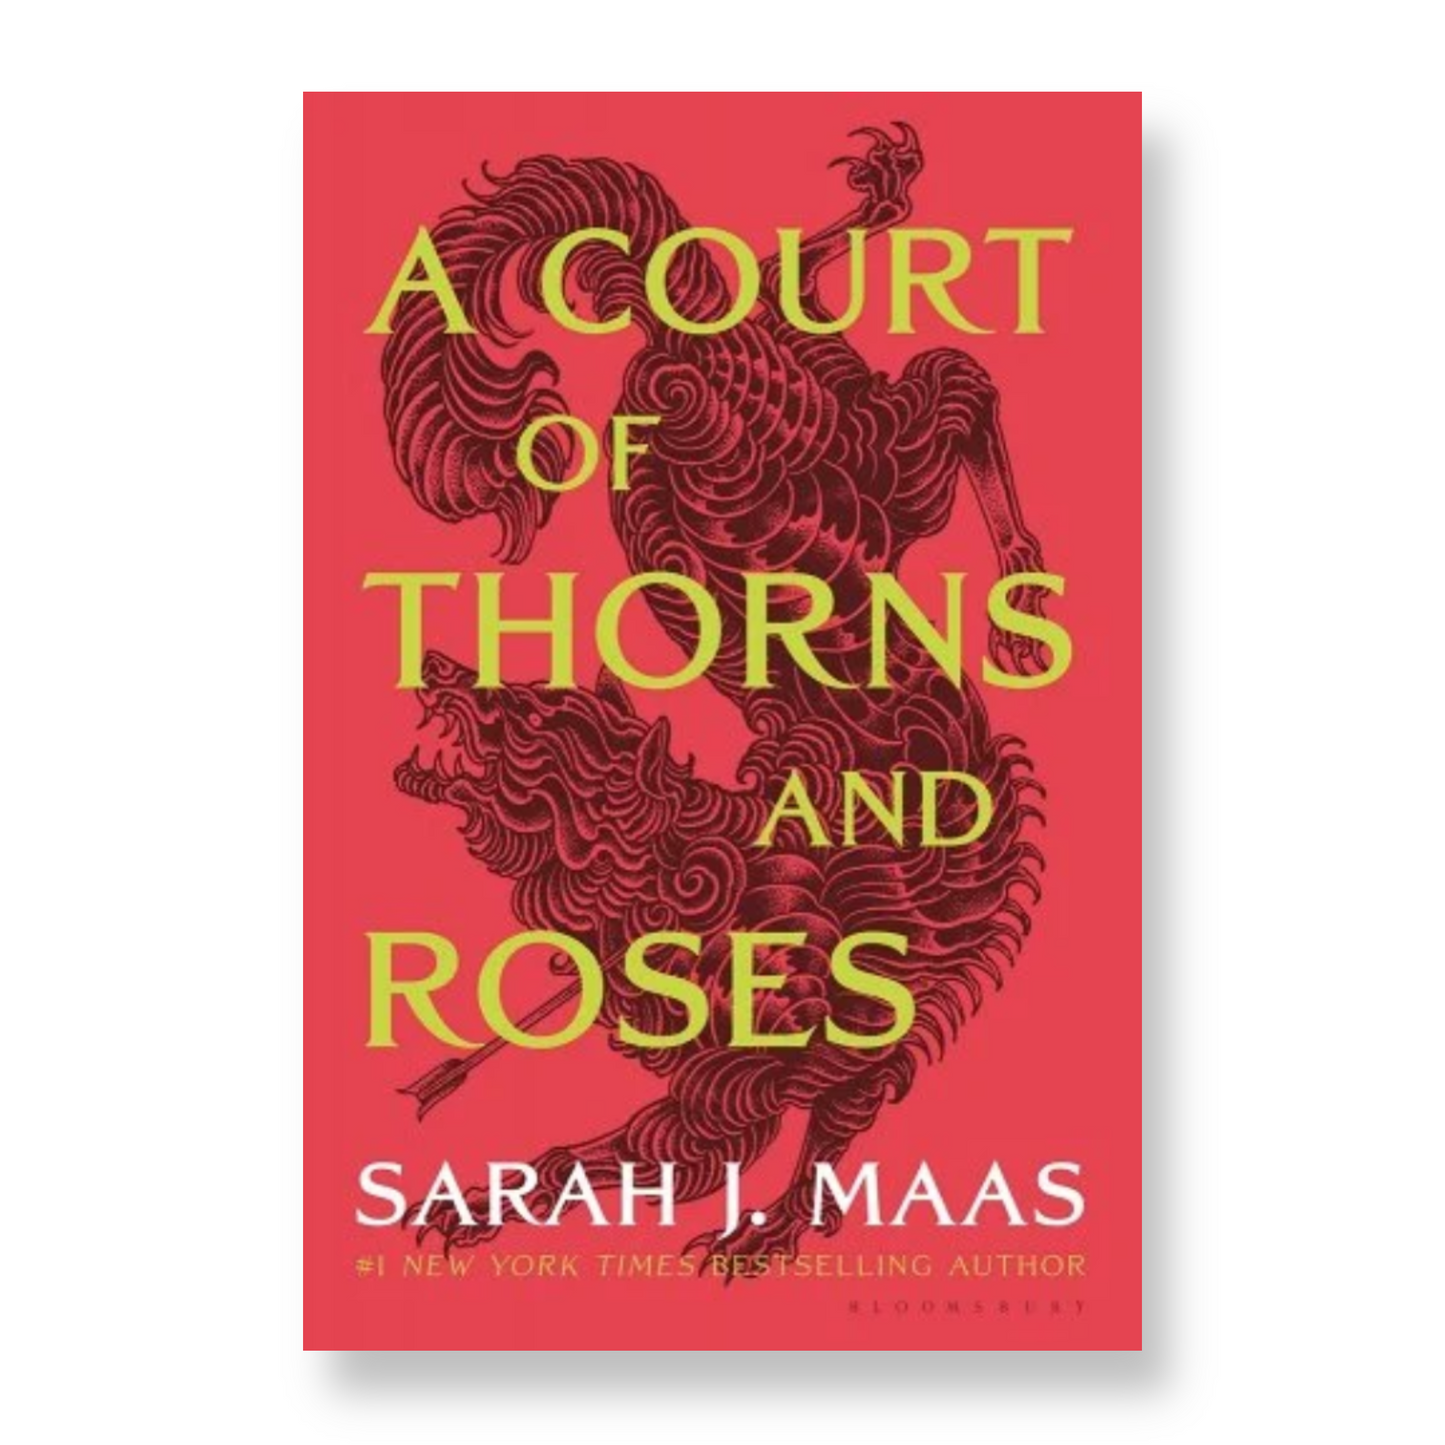 A Court of Silver Thorns